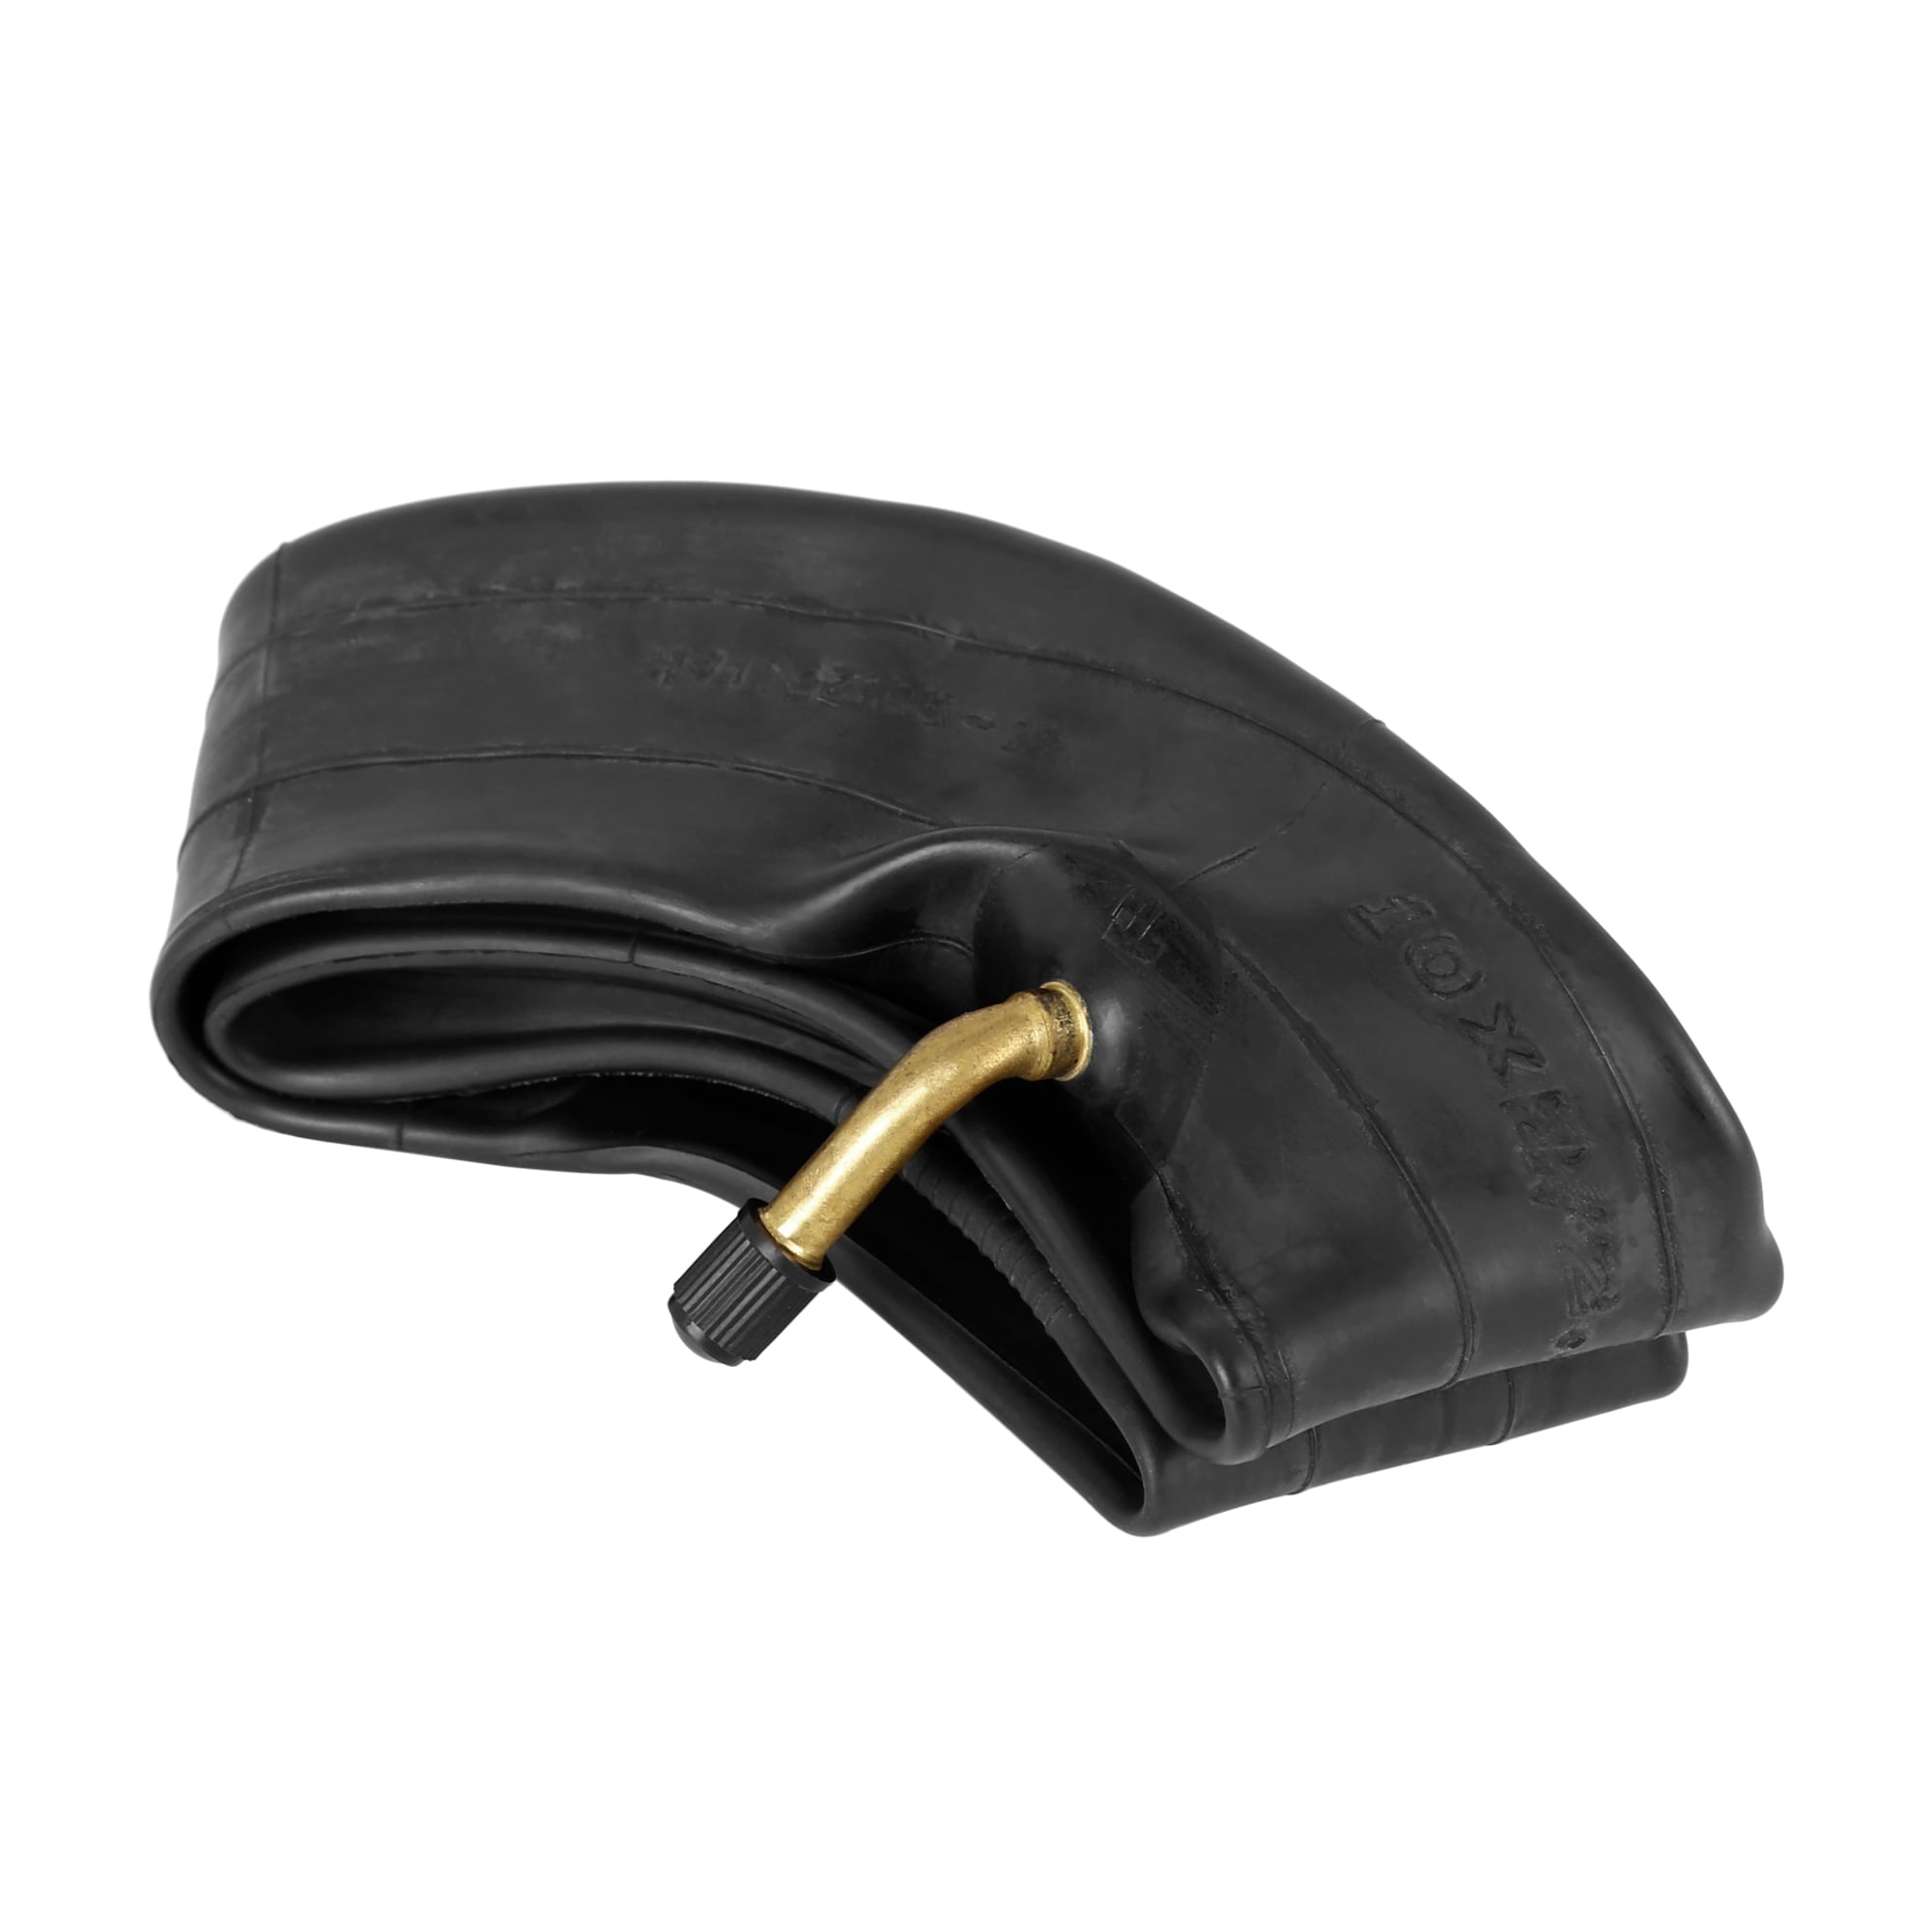 Posted Free 1st Class PUSHCHAIR INNER TUBE 10" X 2.125  BENT VALVE 